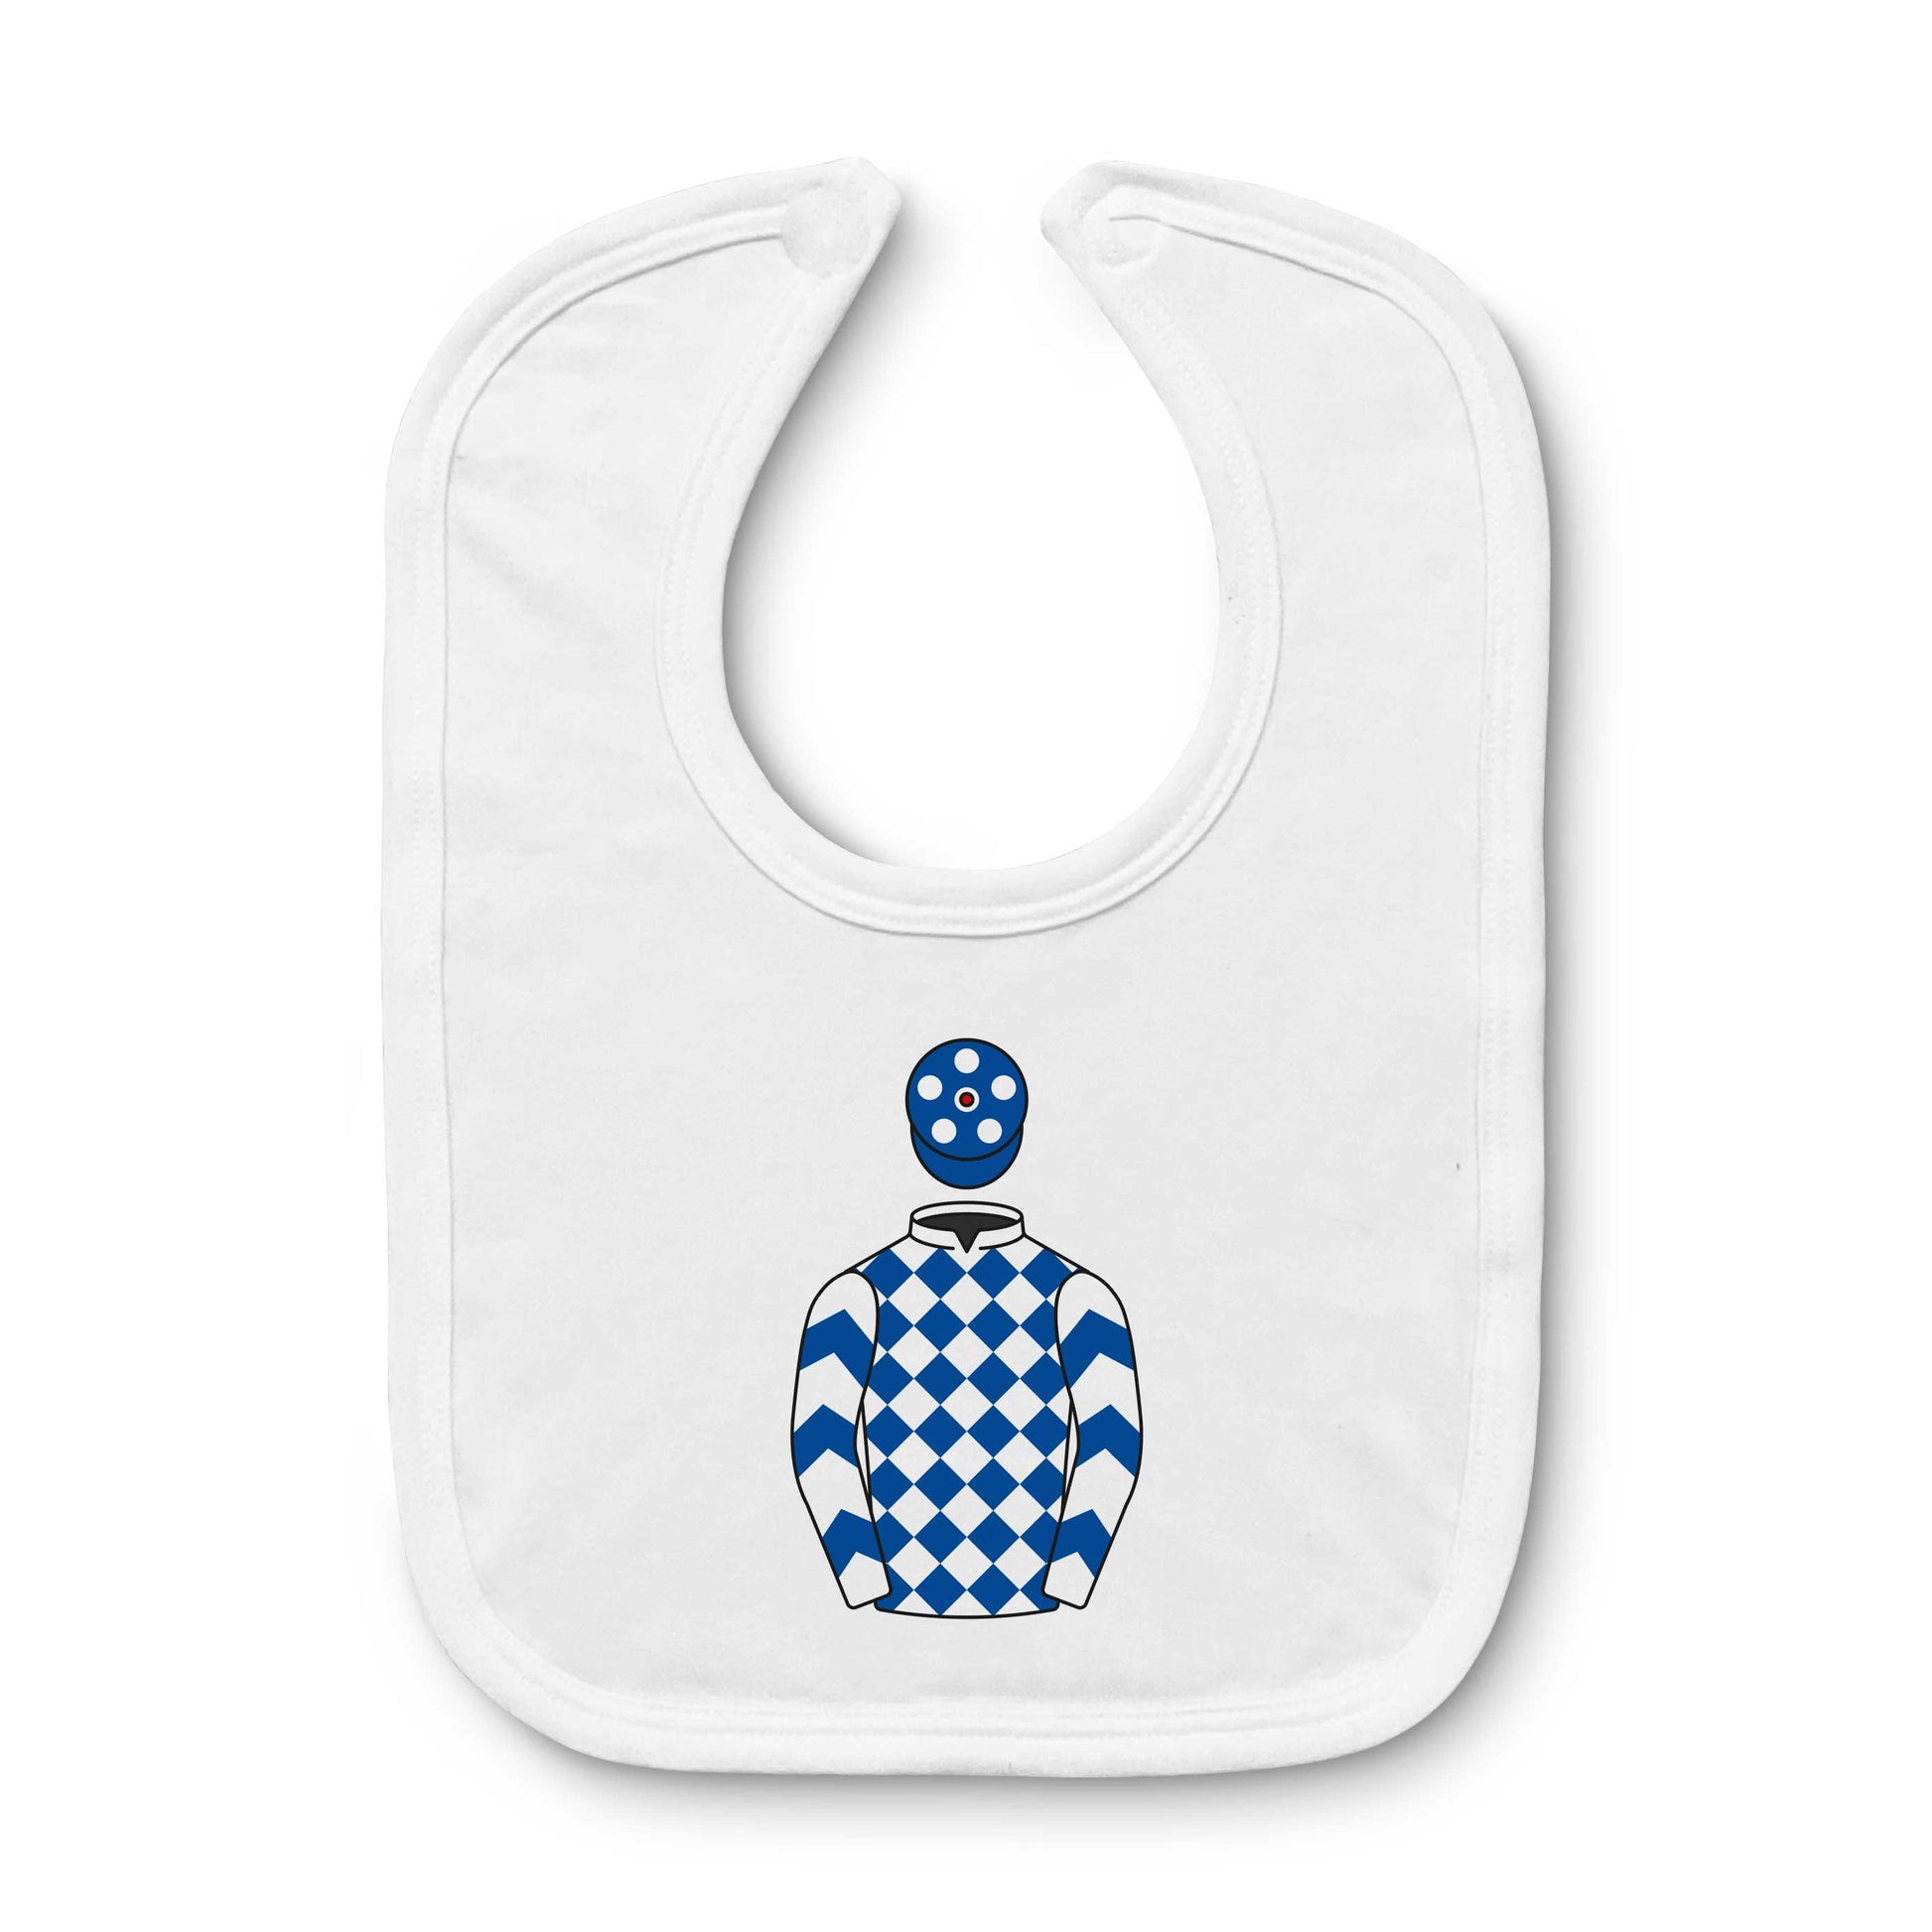 Yes He Does Syndicate Baby Bib - Baby Bib - Hacked Up